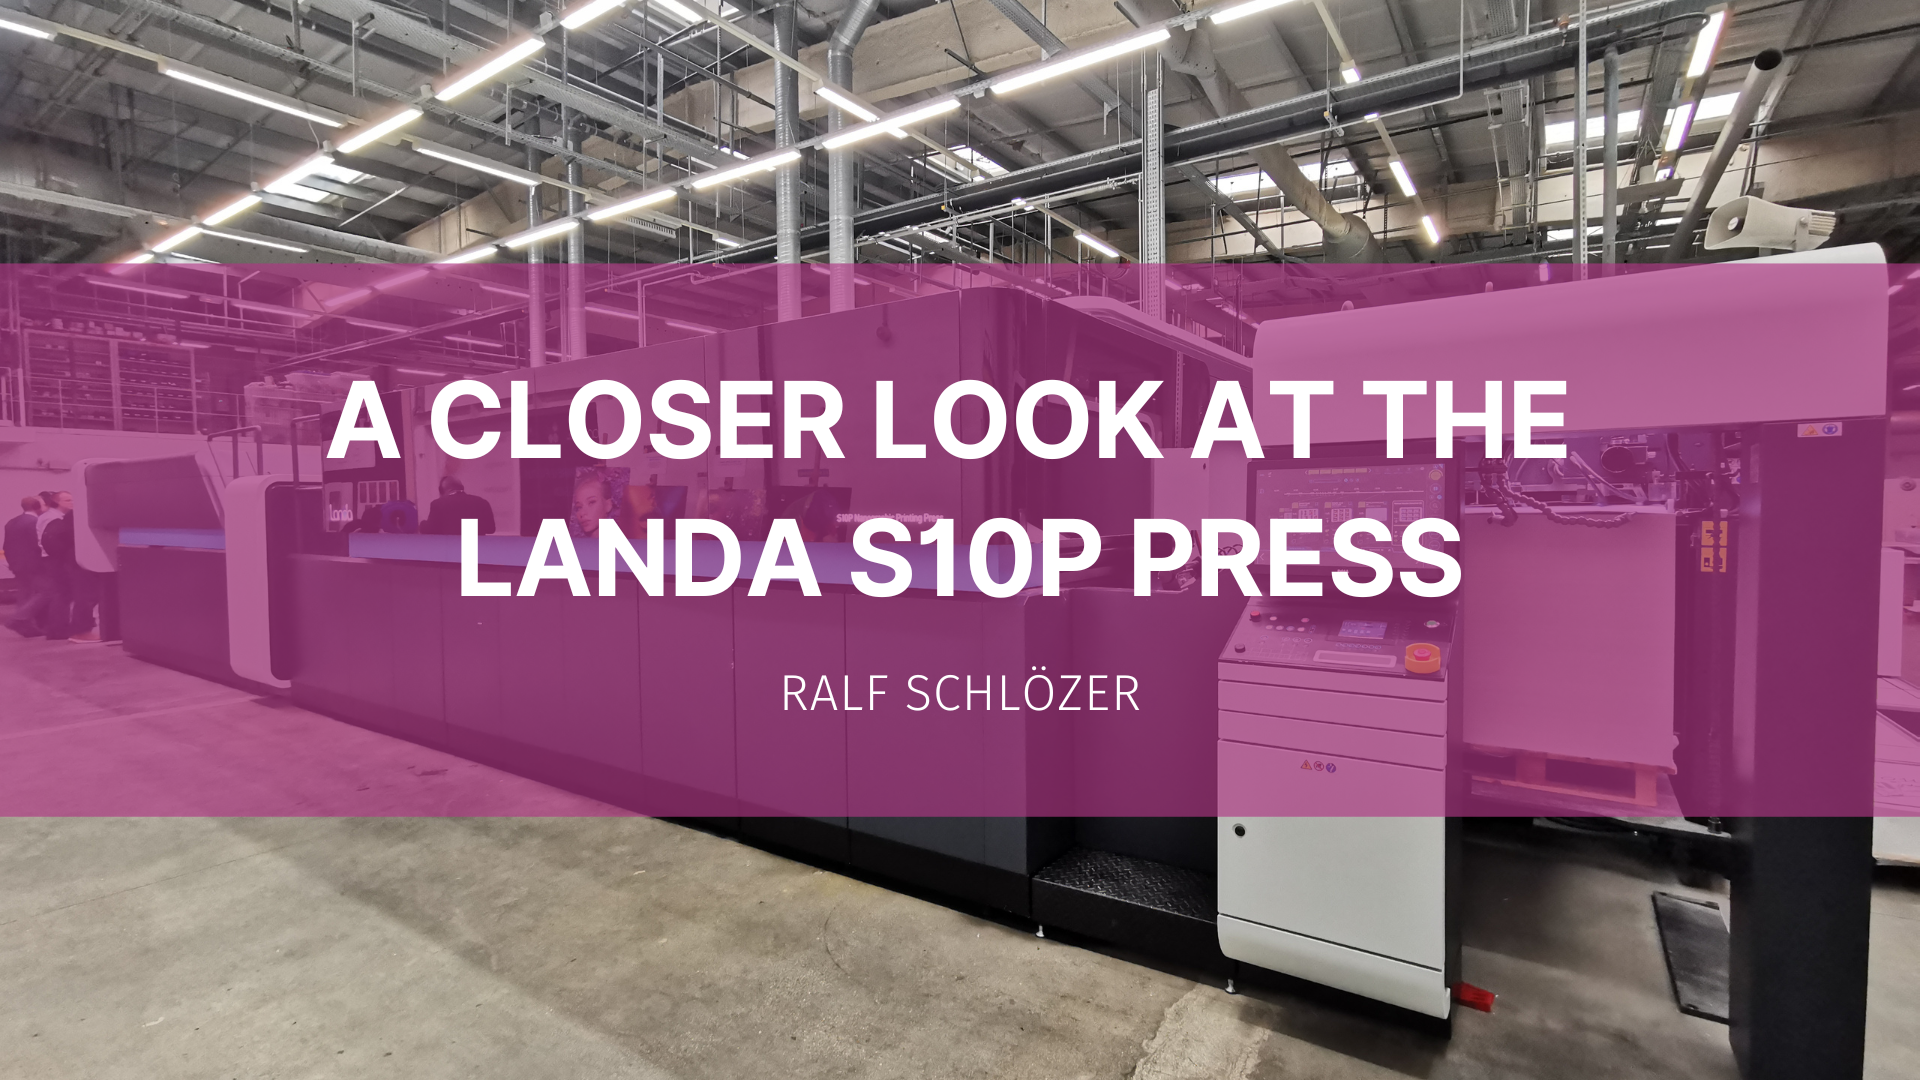 Featured image for “A closer look at the Landa S10P press”